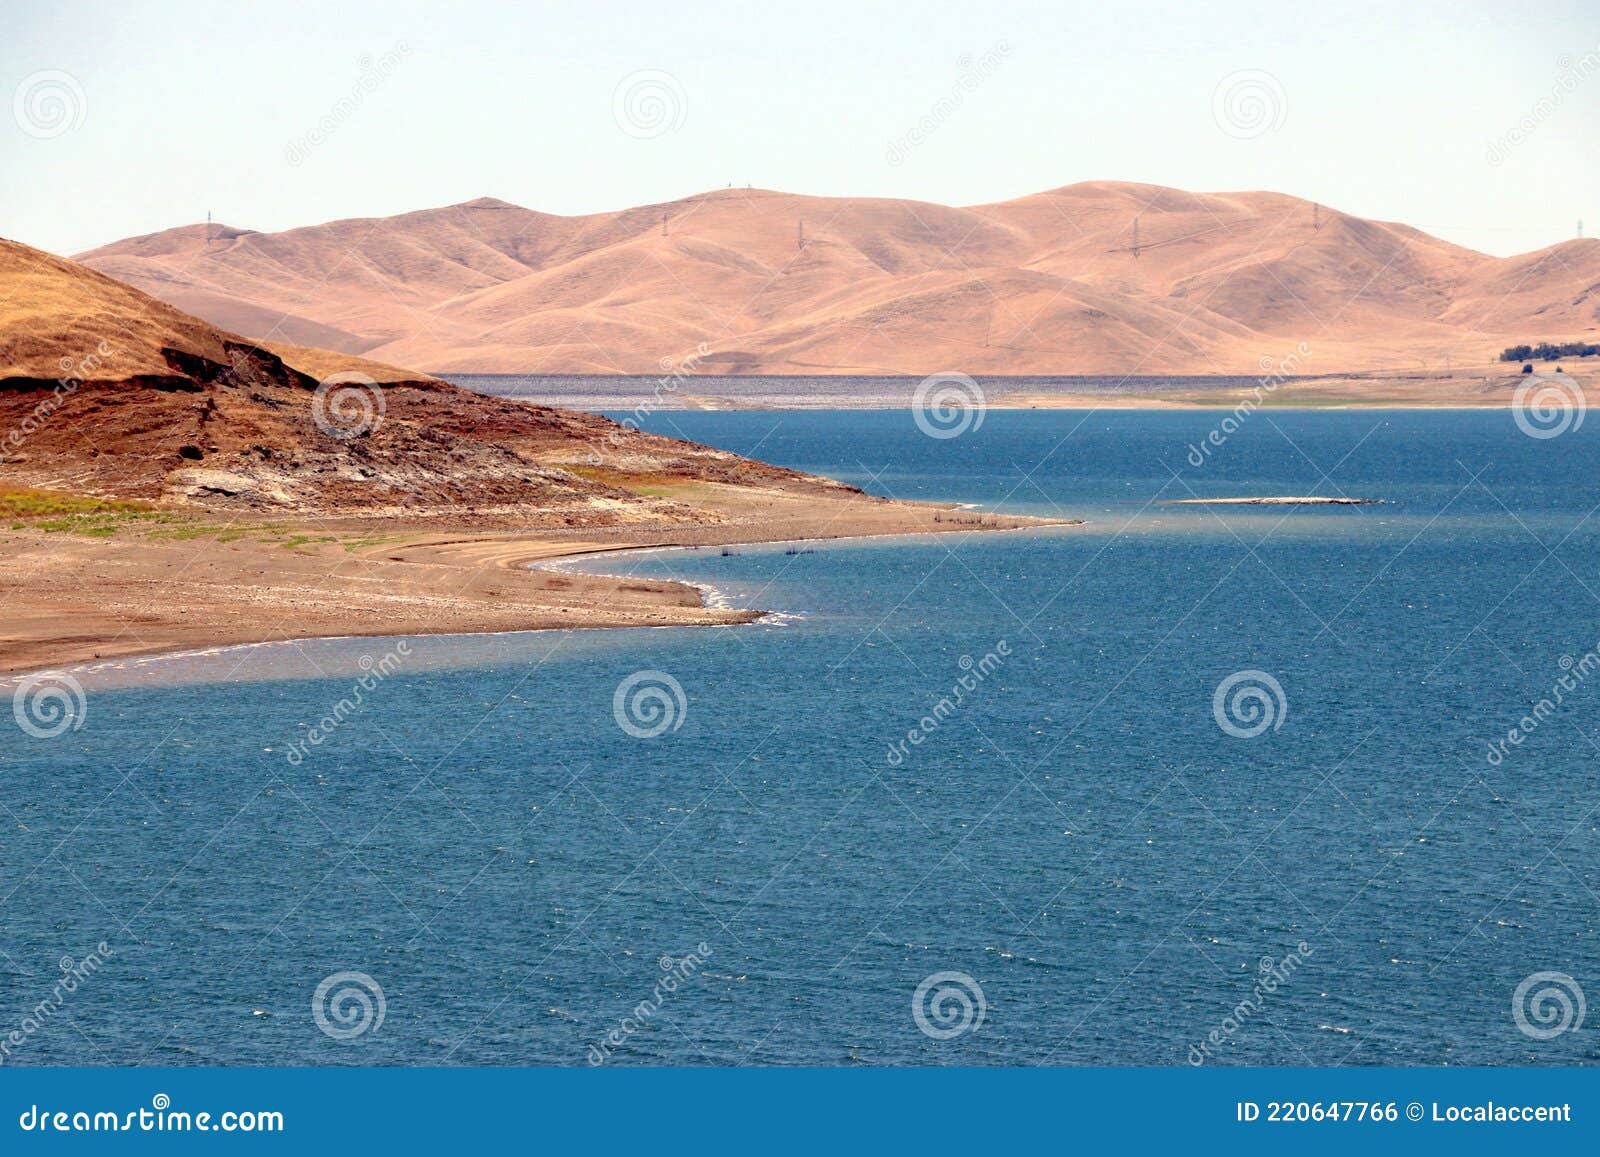 low levels of water in the st luis reservoir, ca.